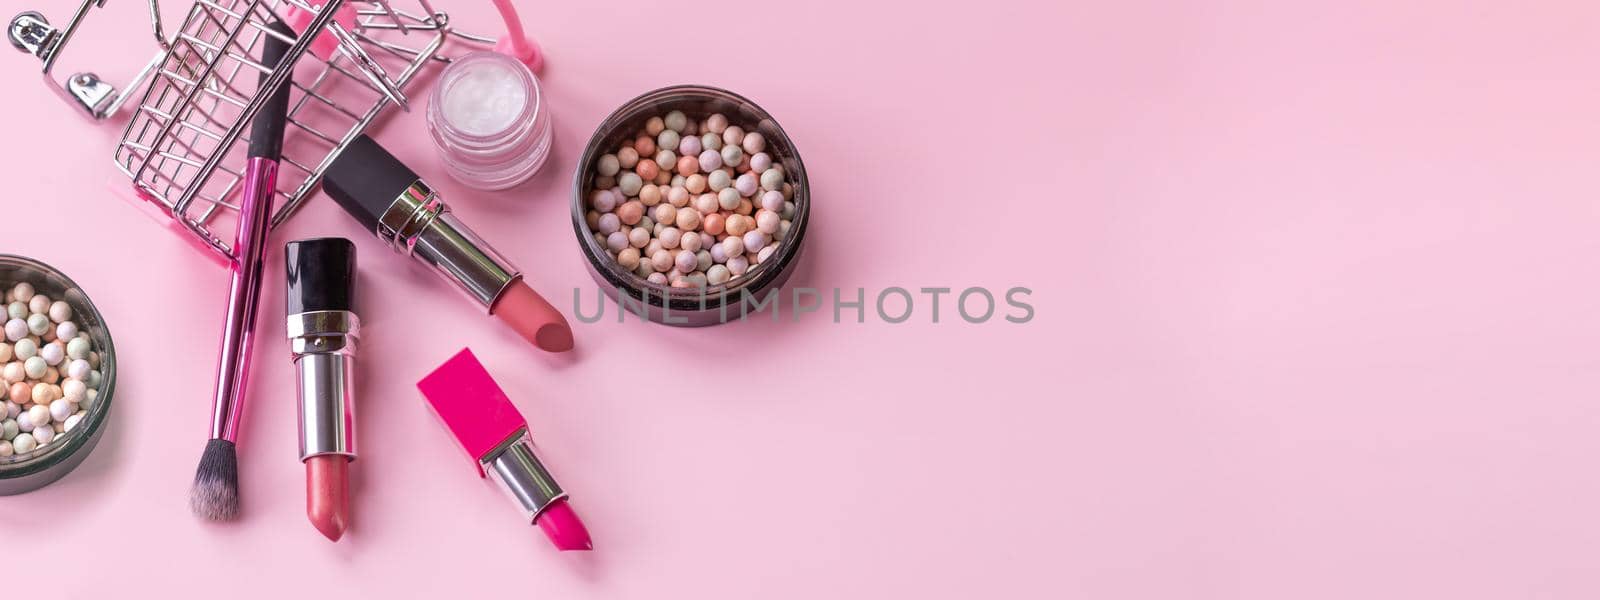 Creative concept with shopping trolley with makeup on a pink background. Makeup brushes, lipsticks,lip gloss in the basket, copy space.Cosmetics in the shopping cart.Bkack friday concept. by YuliaYaspe1979